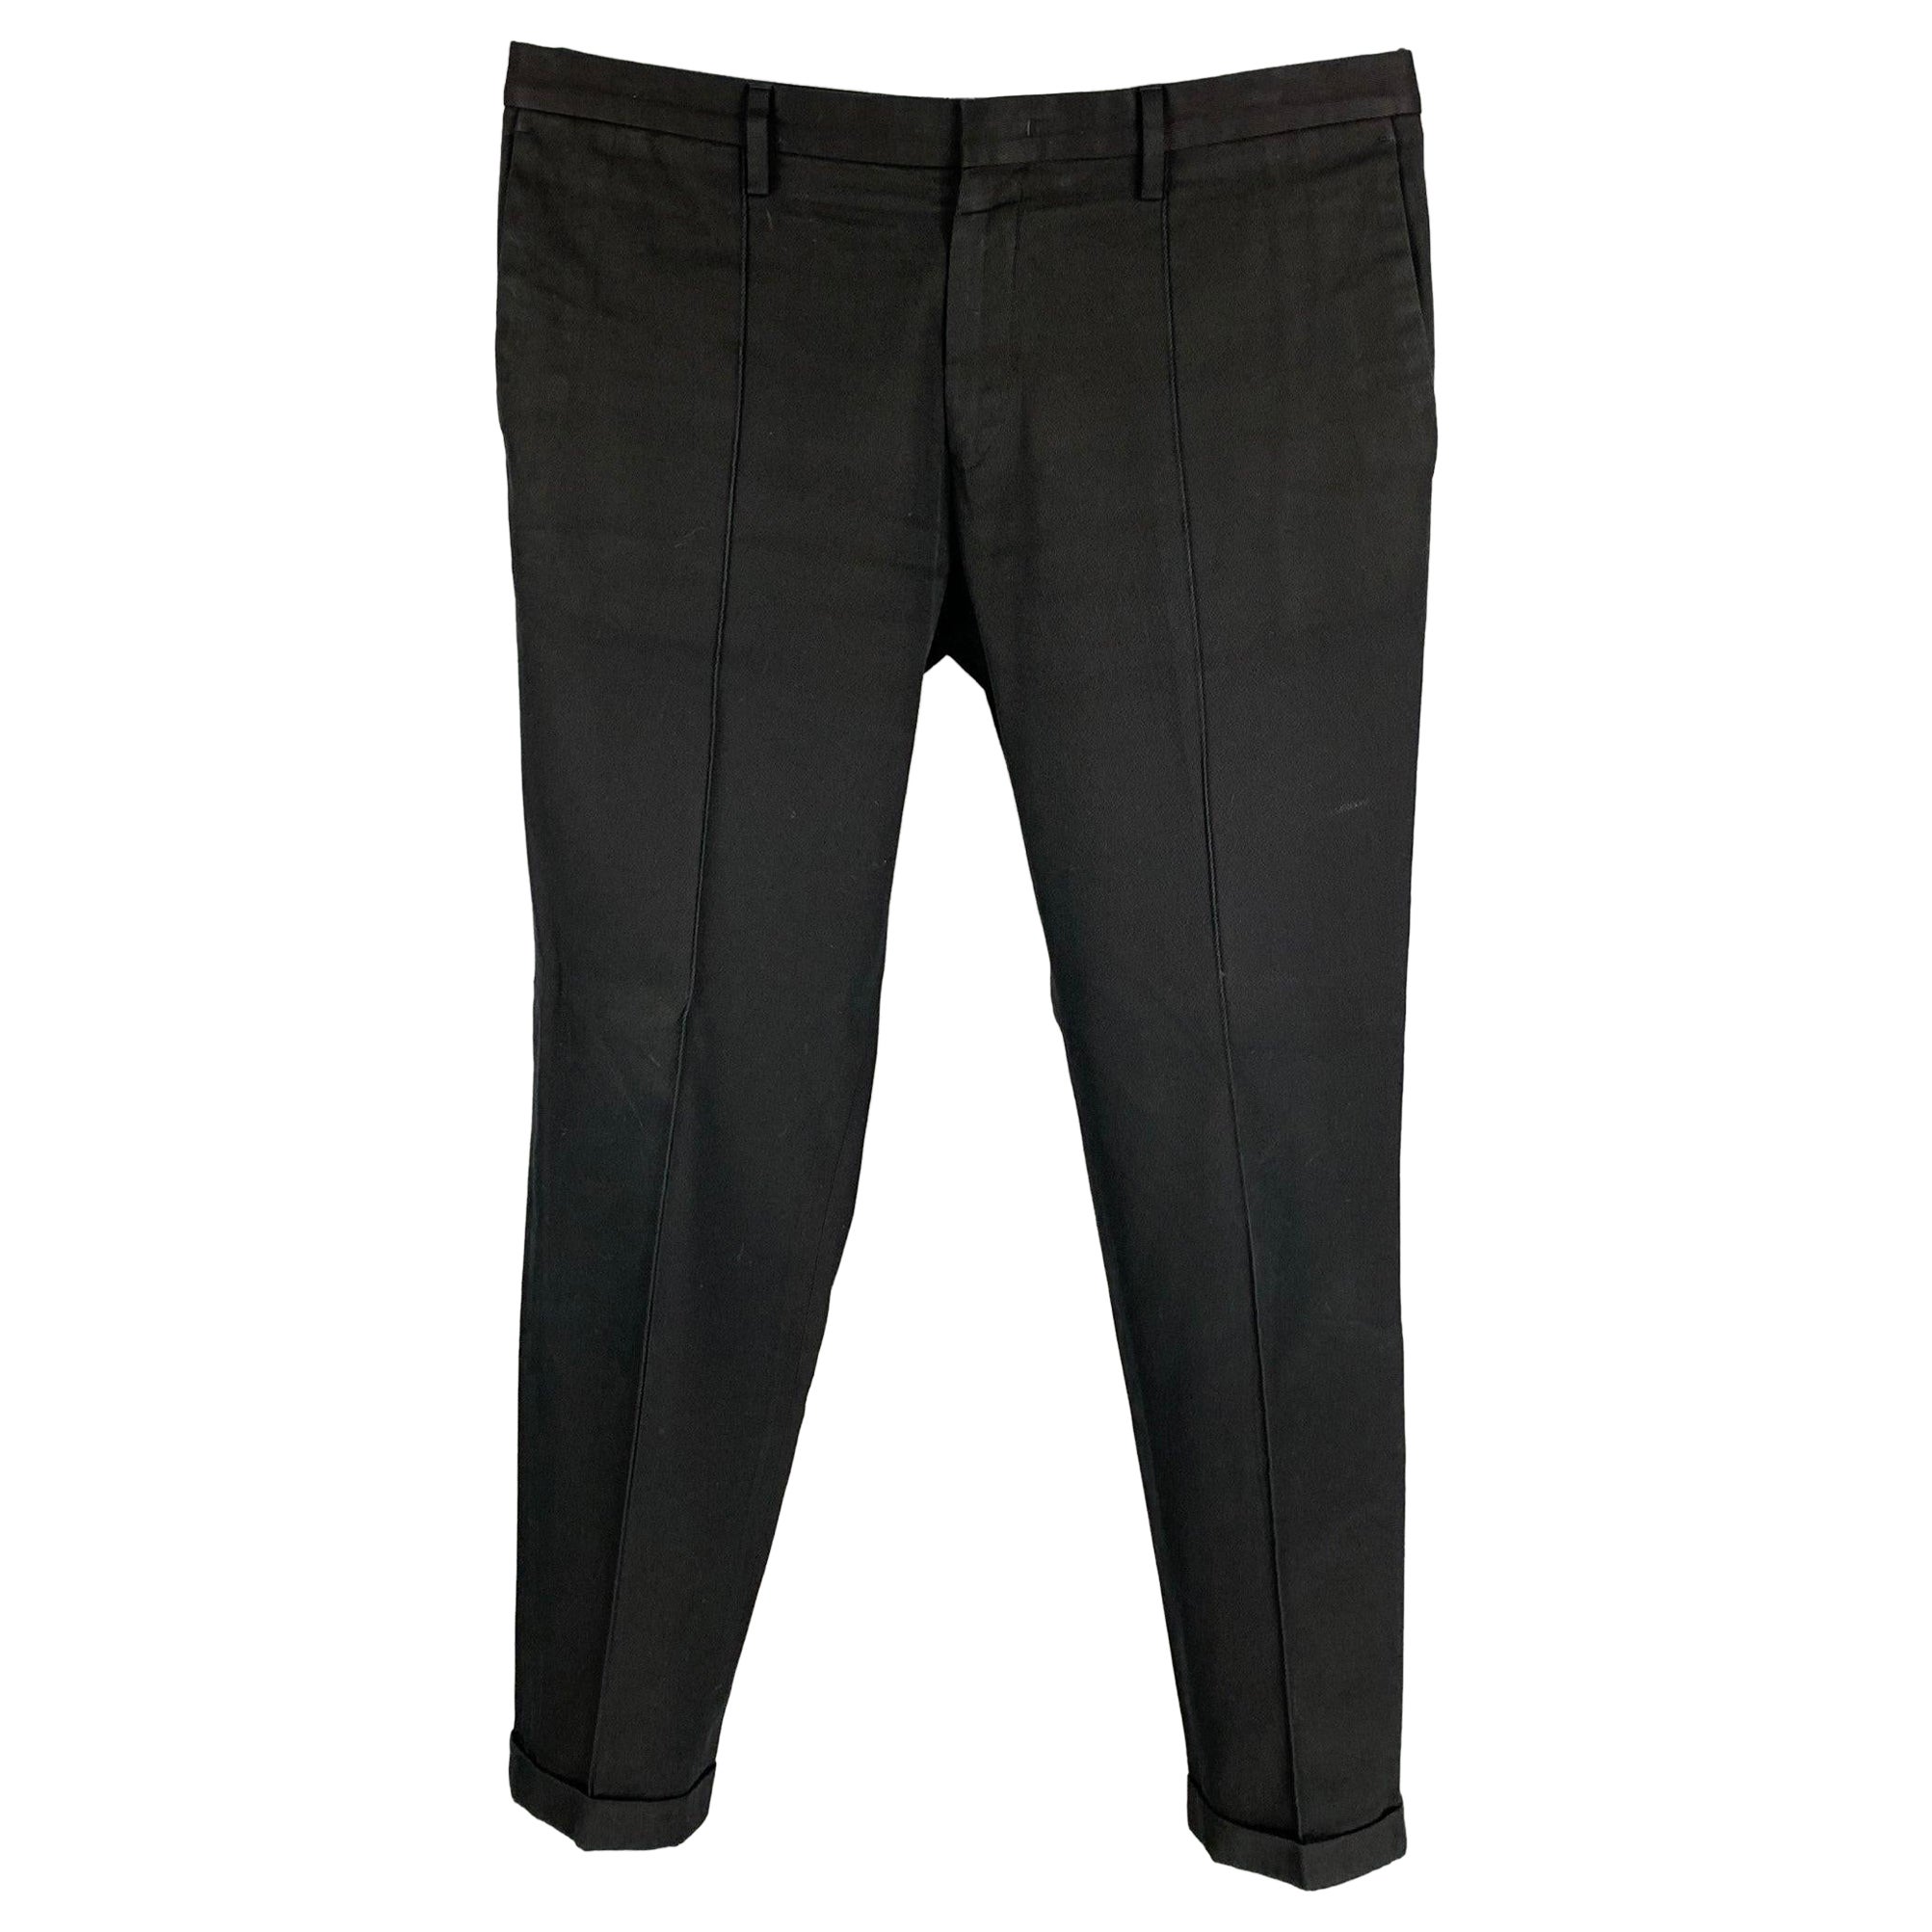 PAUL SMITH Size 36 Black Cotton Chino Casual Pants For Sale